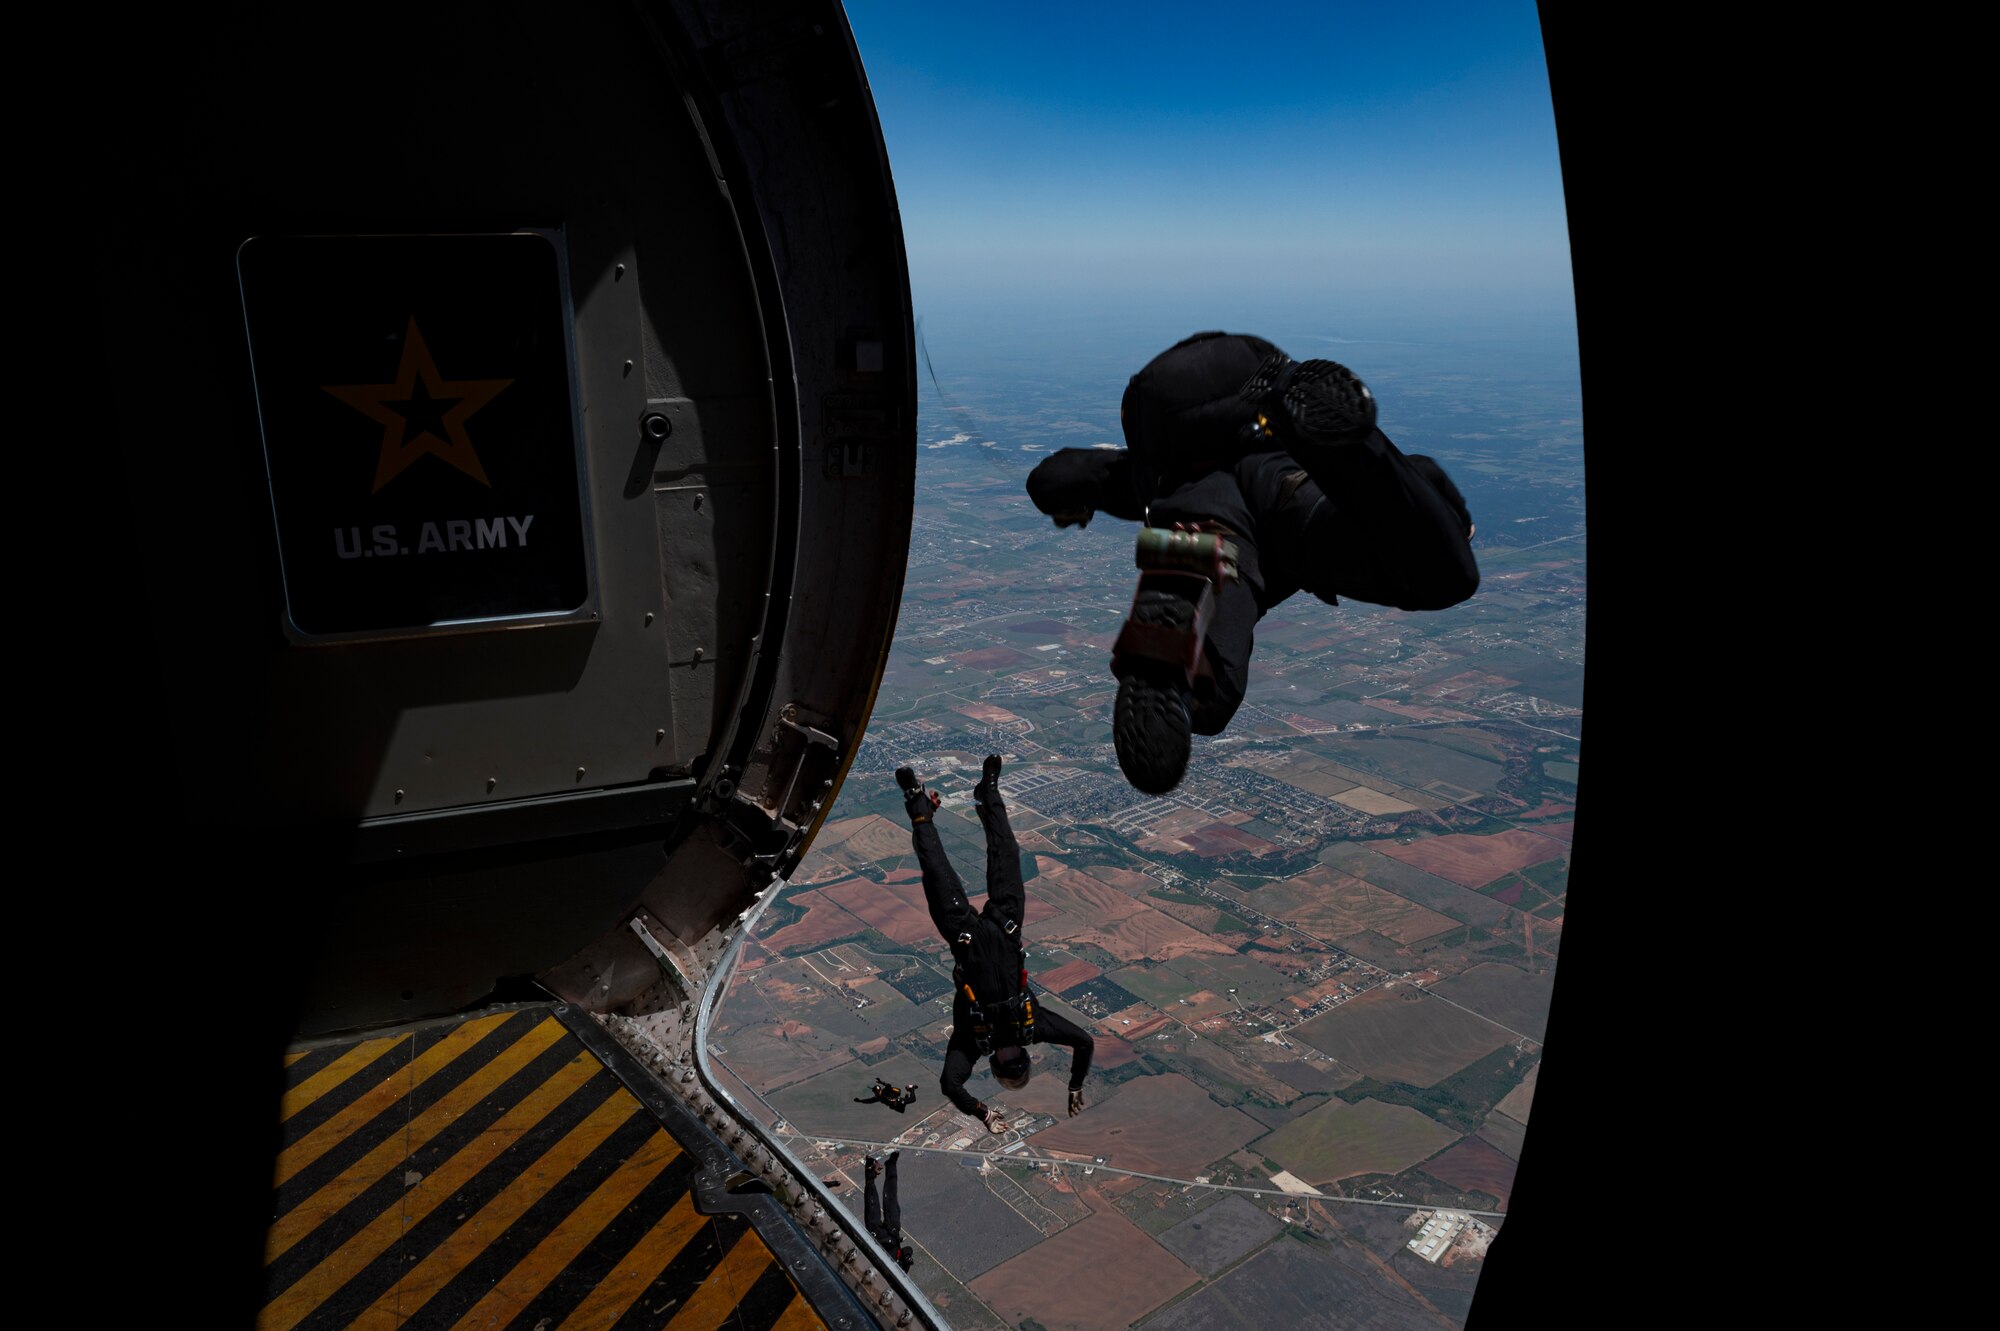 The U.S. Army Golden Knights perform during the 2023 Dyess Big Country Air Fest on Dyess Air Force Base, Texas, April 22, 2023. More than 30,000 event goers attended the one-day event highlighting the best of America’s only Lift and Strike base, Air Force heritage and Dyess community partners. The air show featured the F-22 Raptor demo team, U.S. Air Force Academy Wings of Blue, U.S. Army Golden Knights, WWII heritage flight and B-1B Lancer and C-130J Super Hercules fly overs. (U.S. Air Force photo by Senior Airman Josiah Brown)